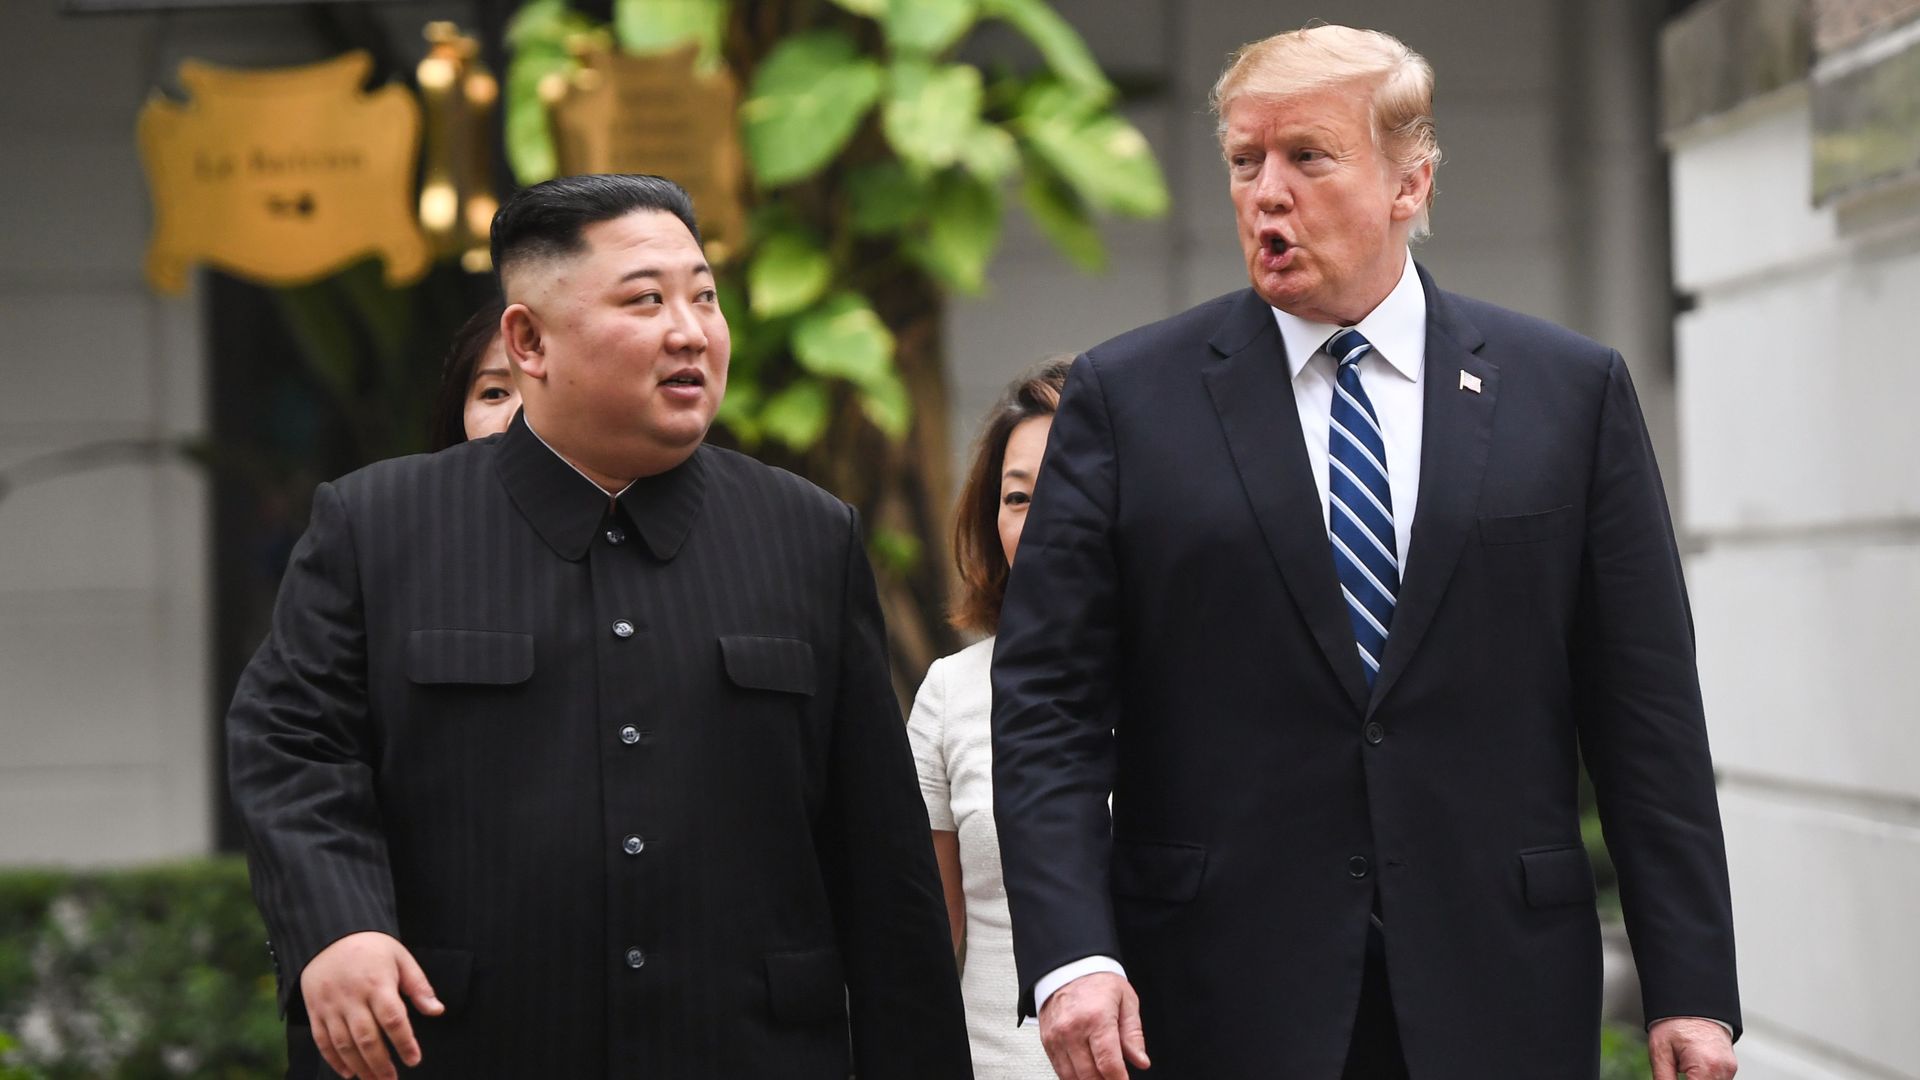 In this image, President Trump and Chairman Kim walk outside next to each other. 